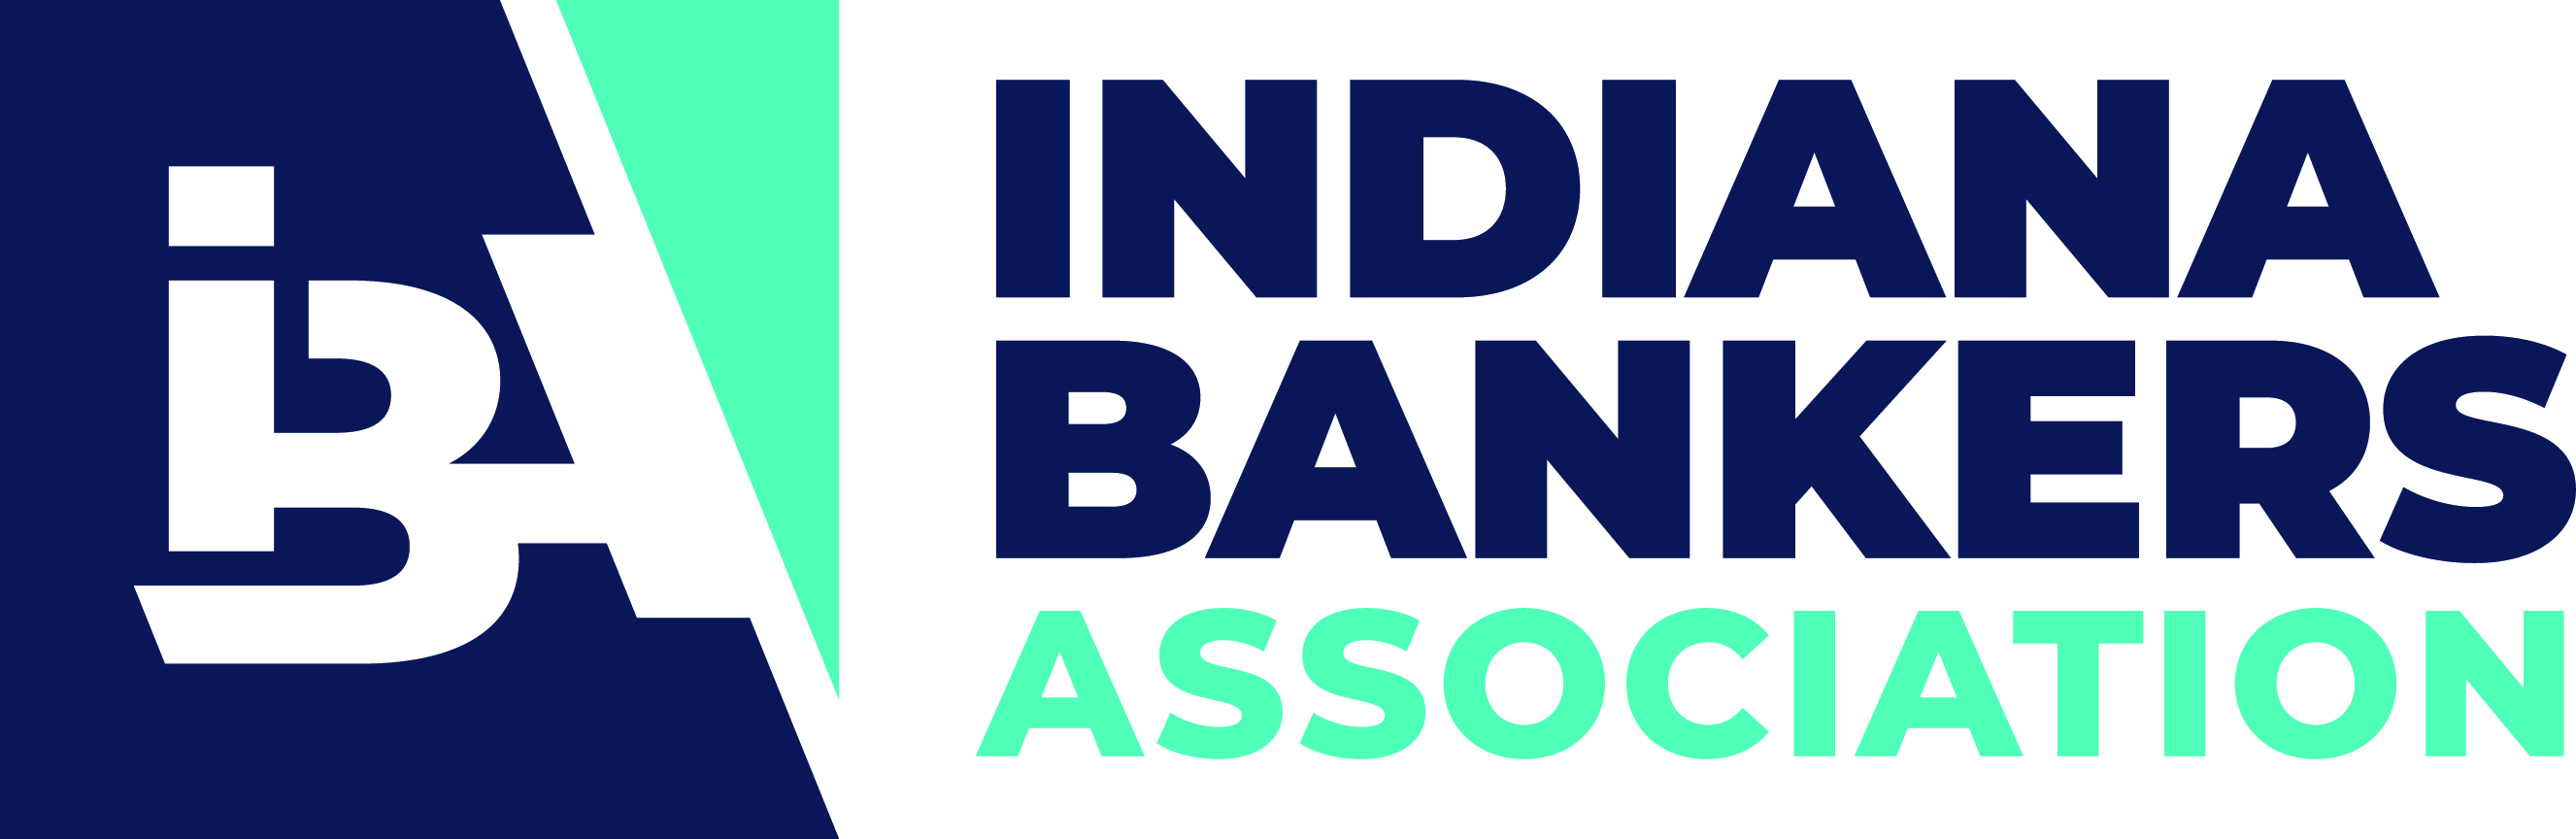 Indiana Bankers Association